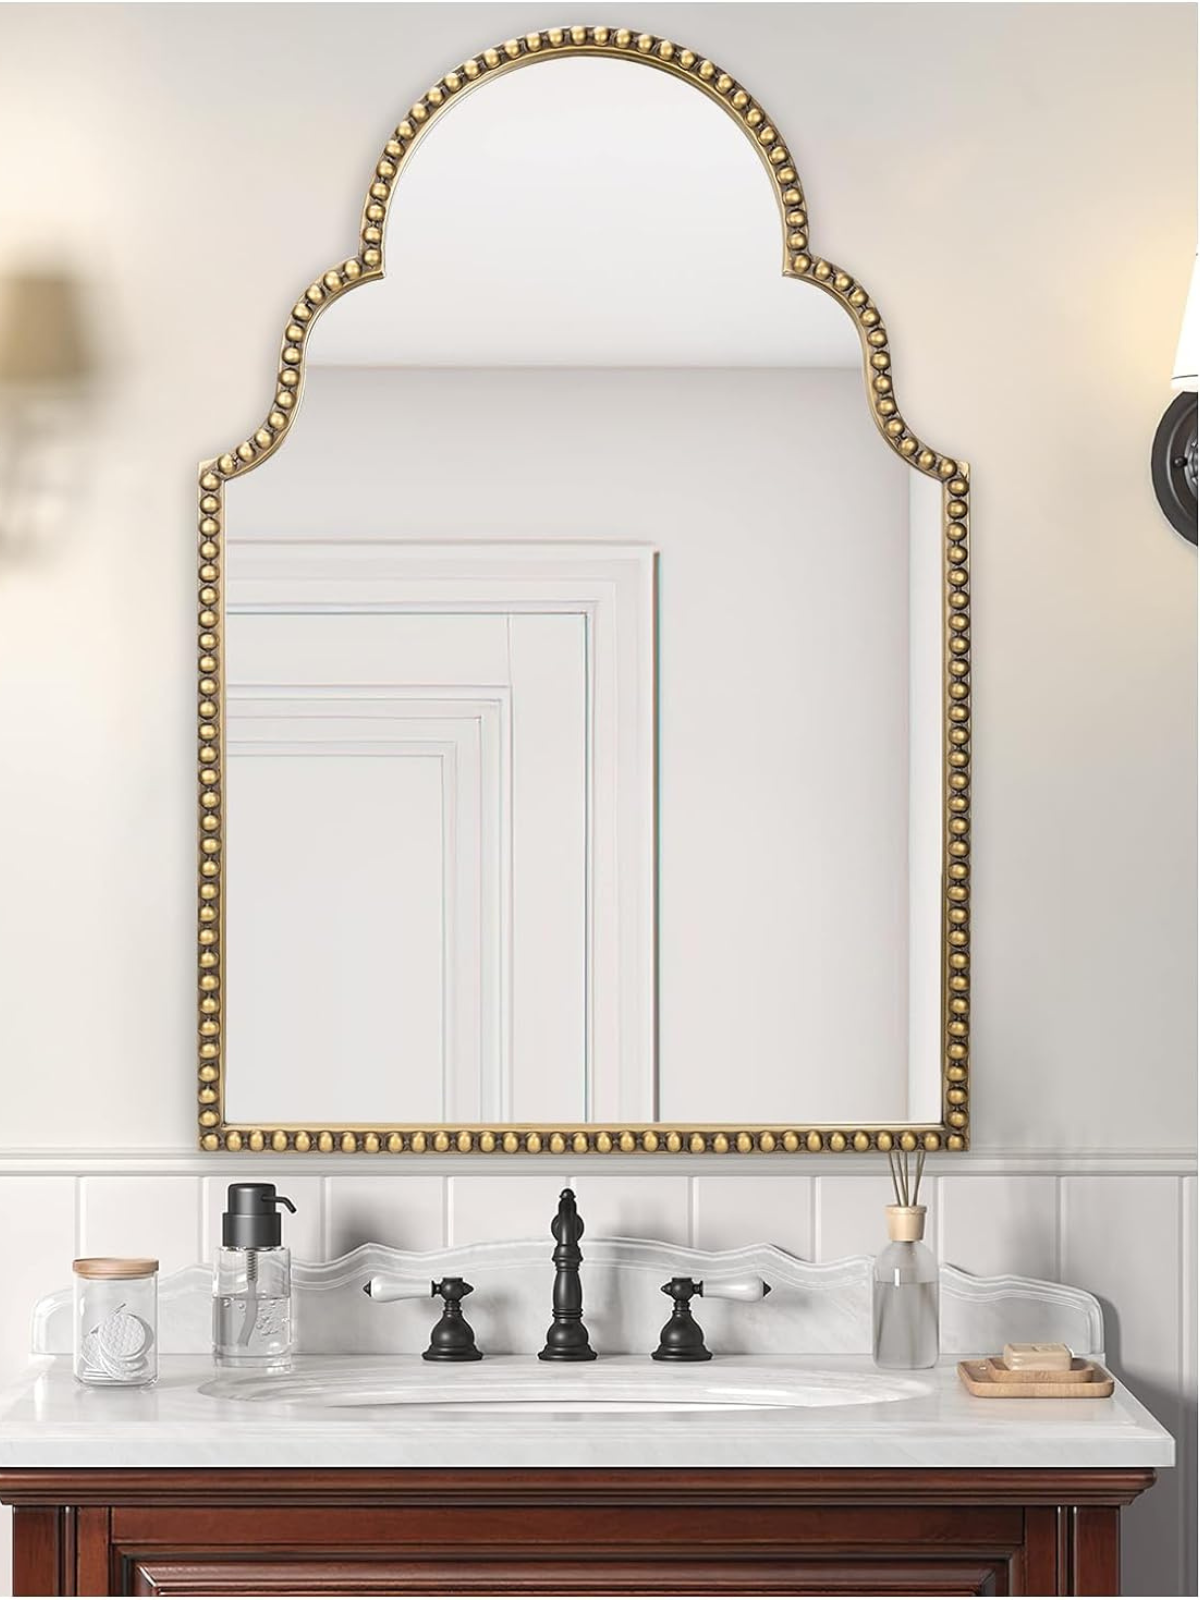 Arch Wall Mirror, 24" x 36" Antique Gold Scalloped Bathroom Mirror, Metal Beaded Frame Accent Decorative Mirror for Entryway, Living Room, Bedroom